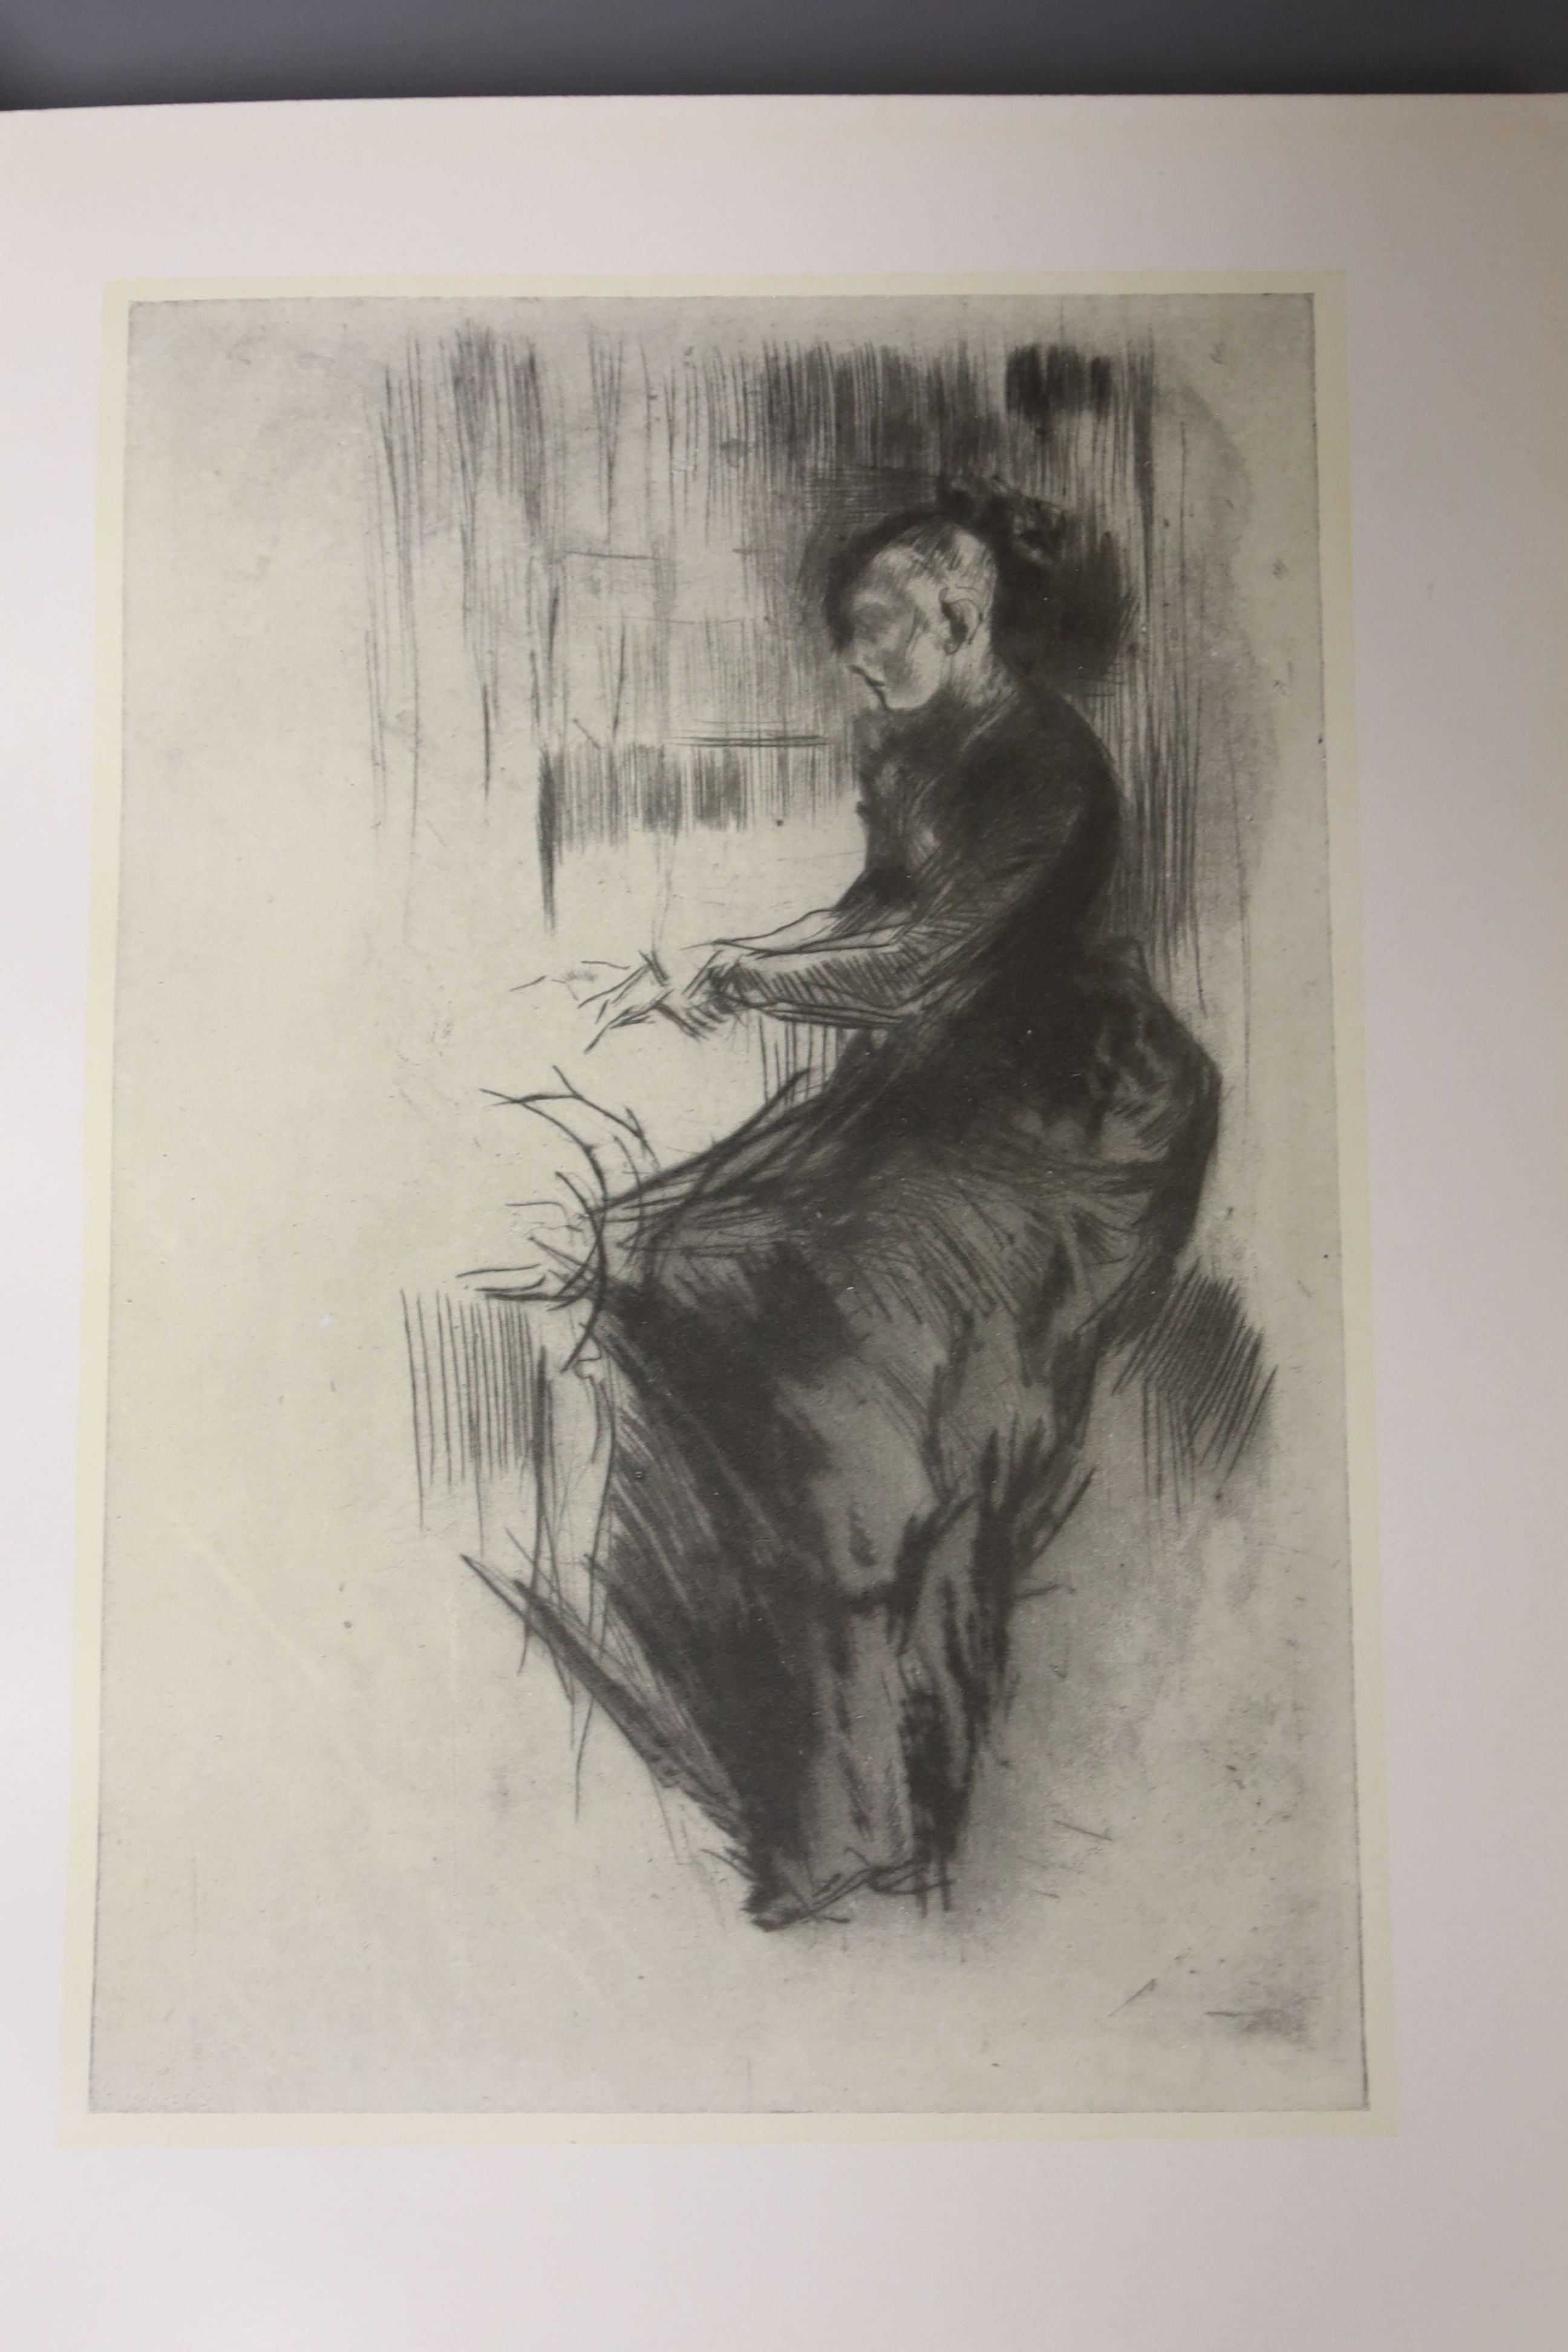 Menpes, Mortimer - Whistler As I Knew Him, limited edition, etched frontis and 125 other plates (some coloured) with thin-paper